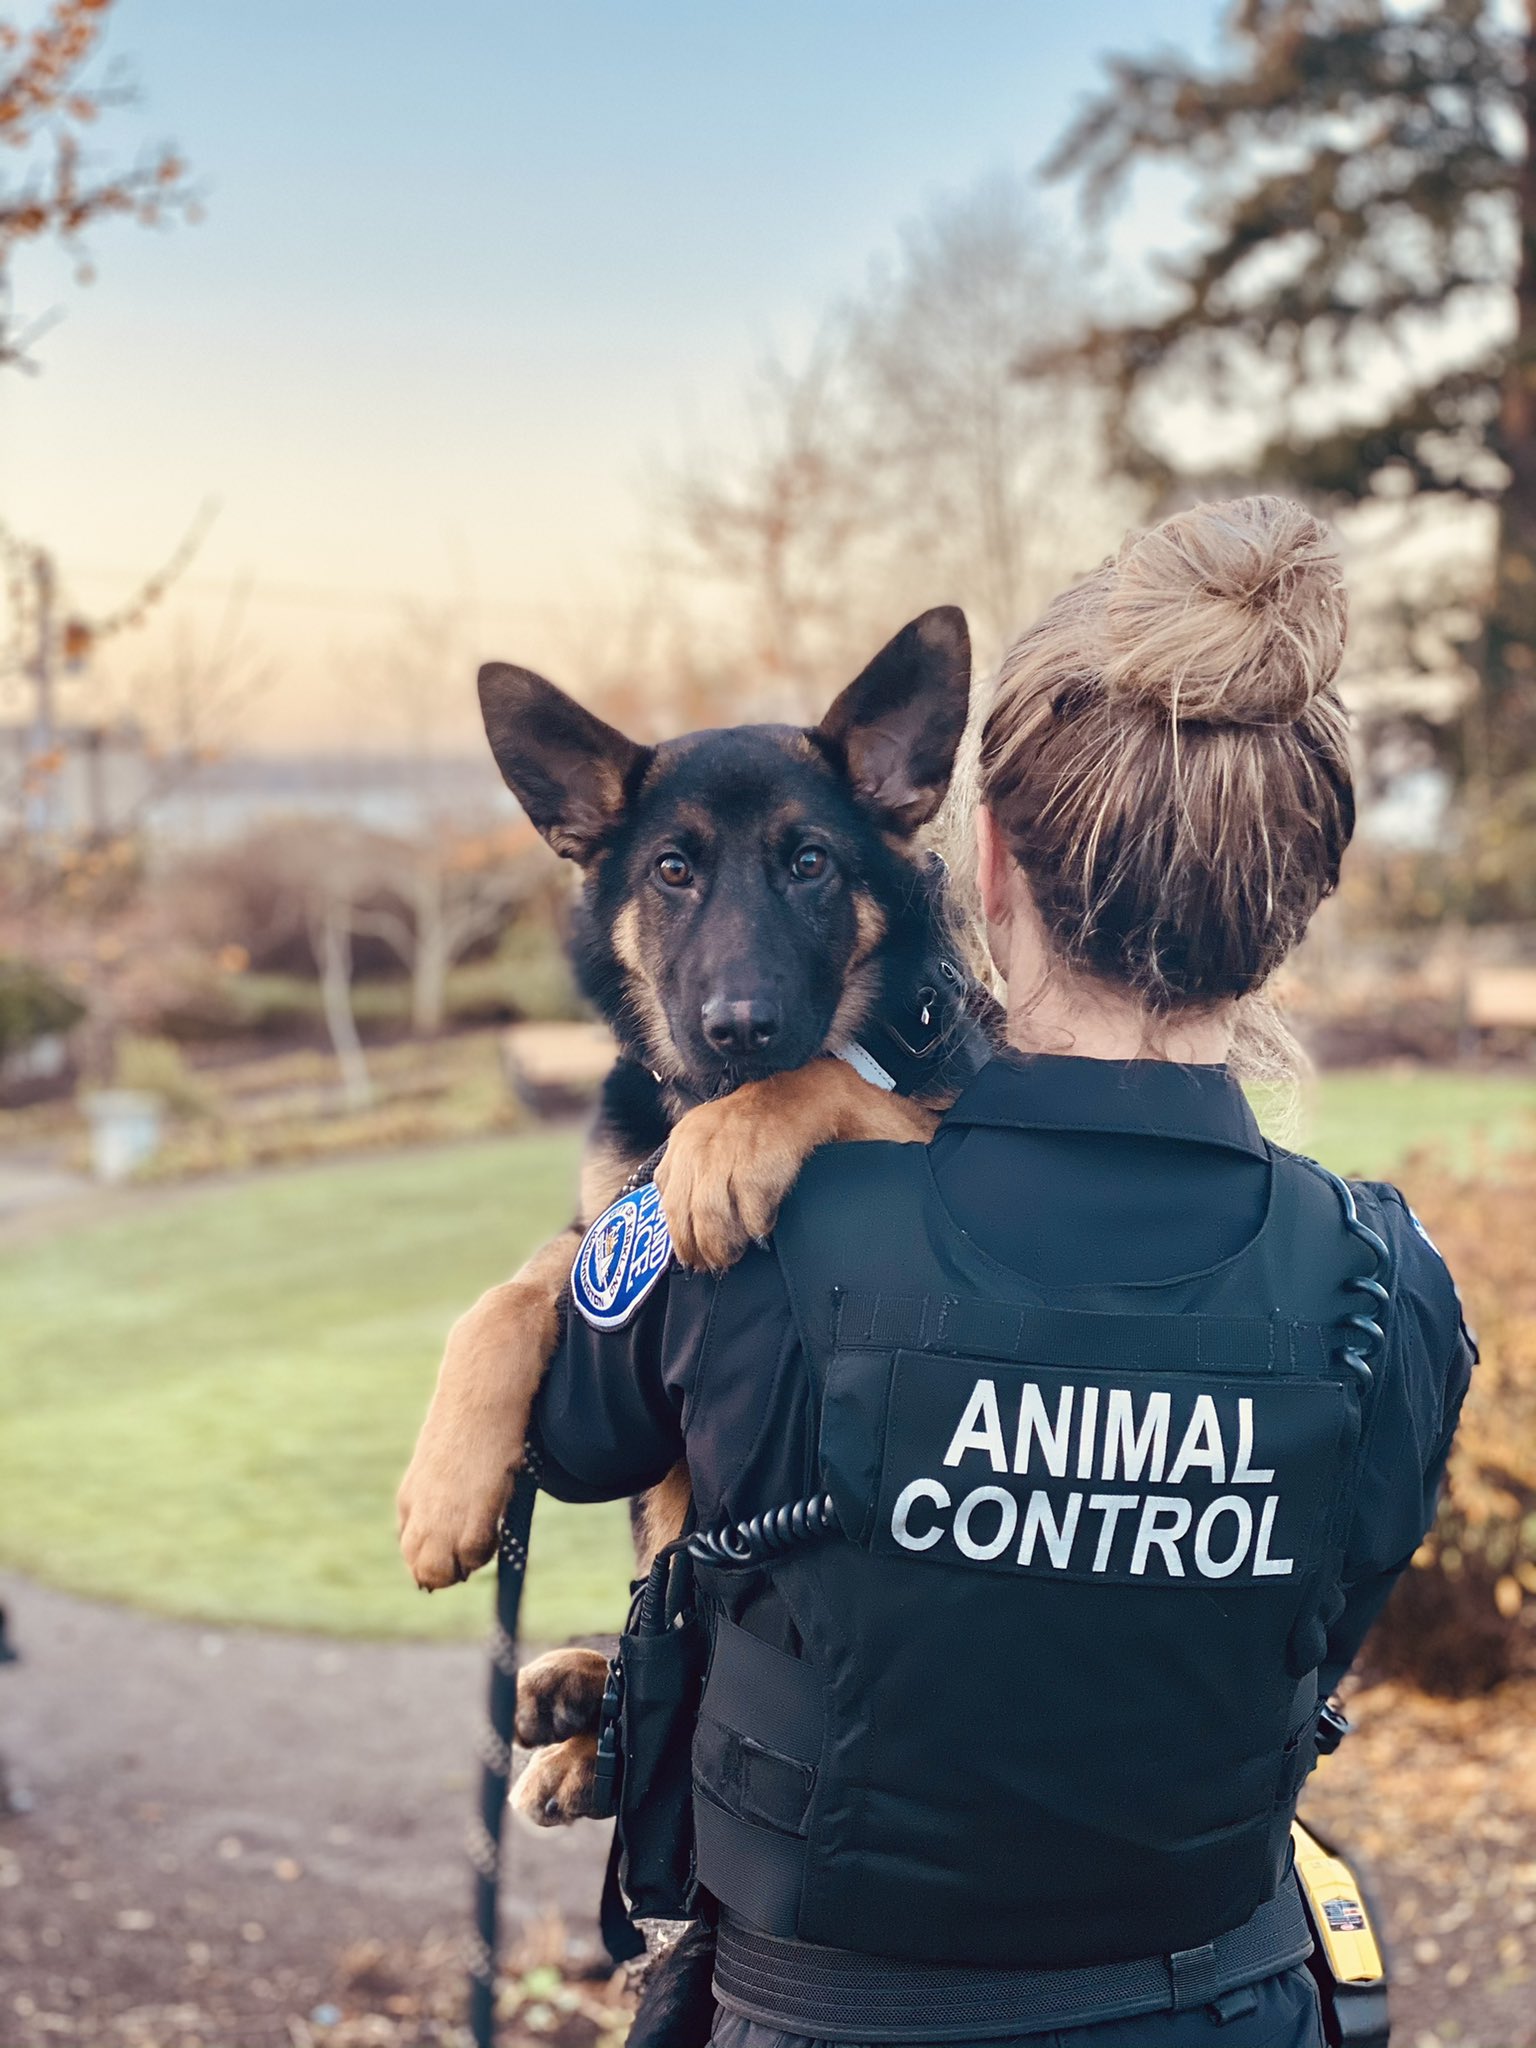 Kirkland Police You An Outgoing, Customer Service Oriented Individual That Cares About The Safety And Welfare Of Animals? We're Looking To Hire An Animal Control Officer! Apply Here